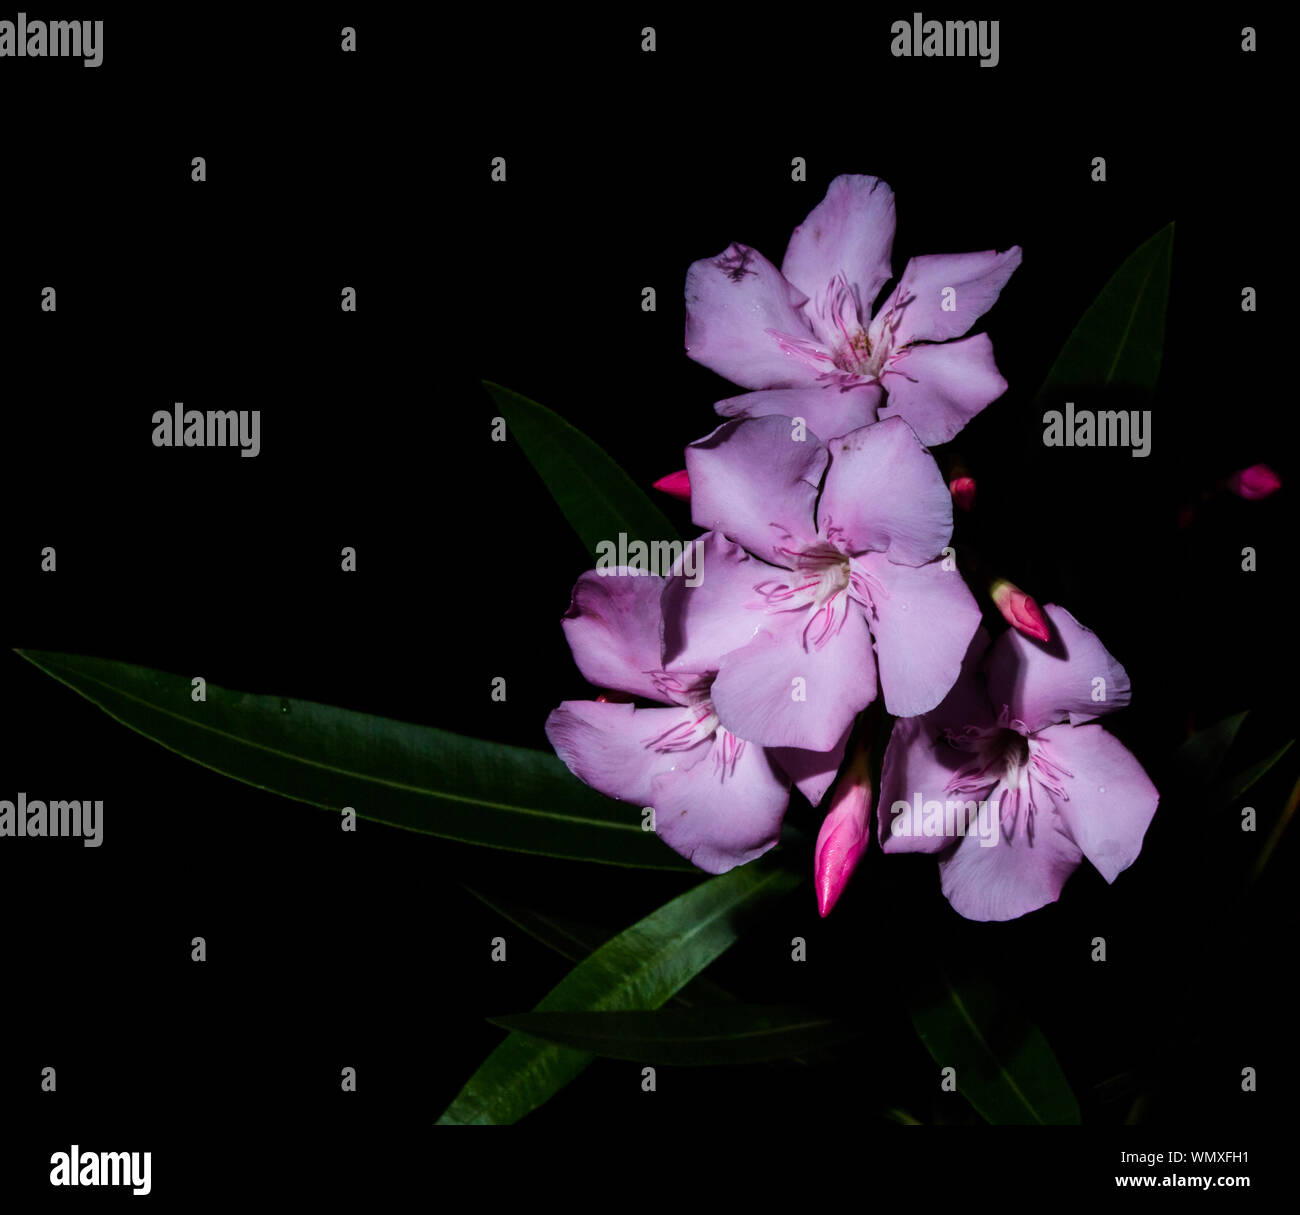 Close-up Of Pink Flowers Against Black Background Stock Photo